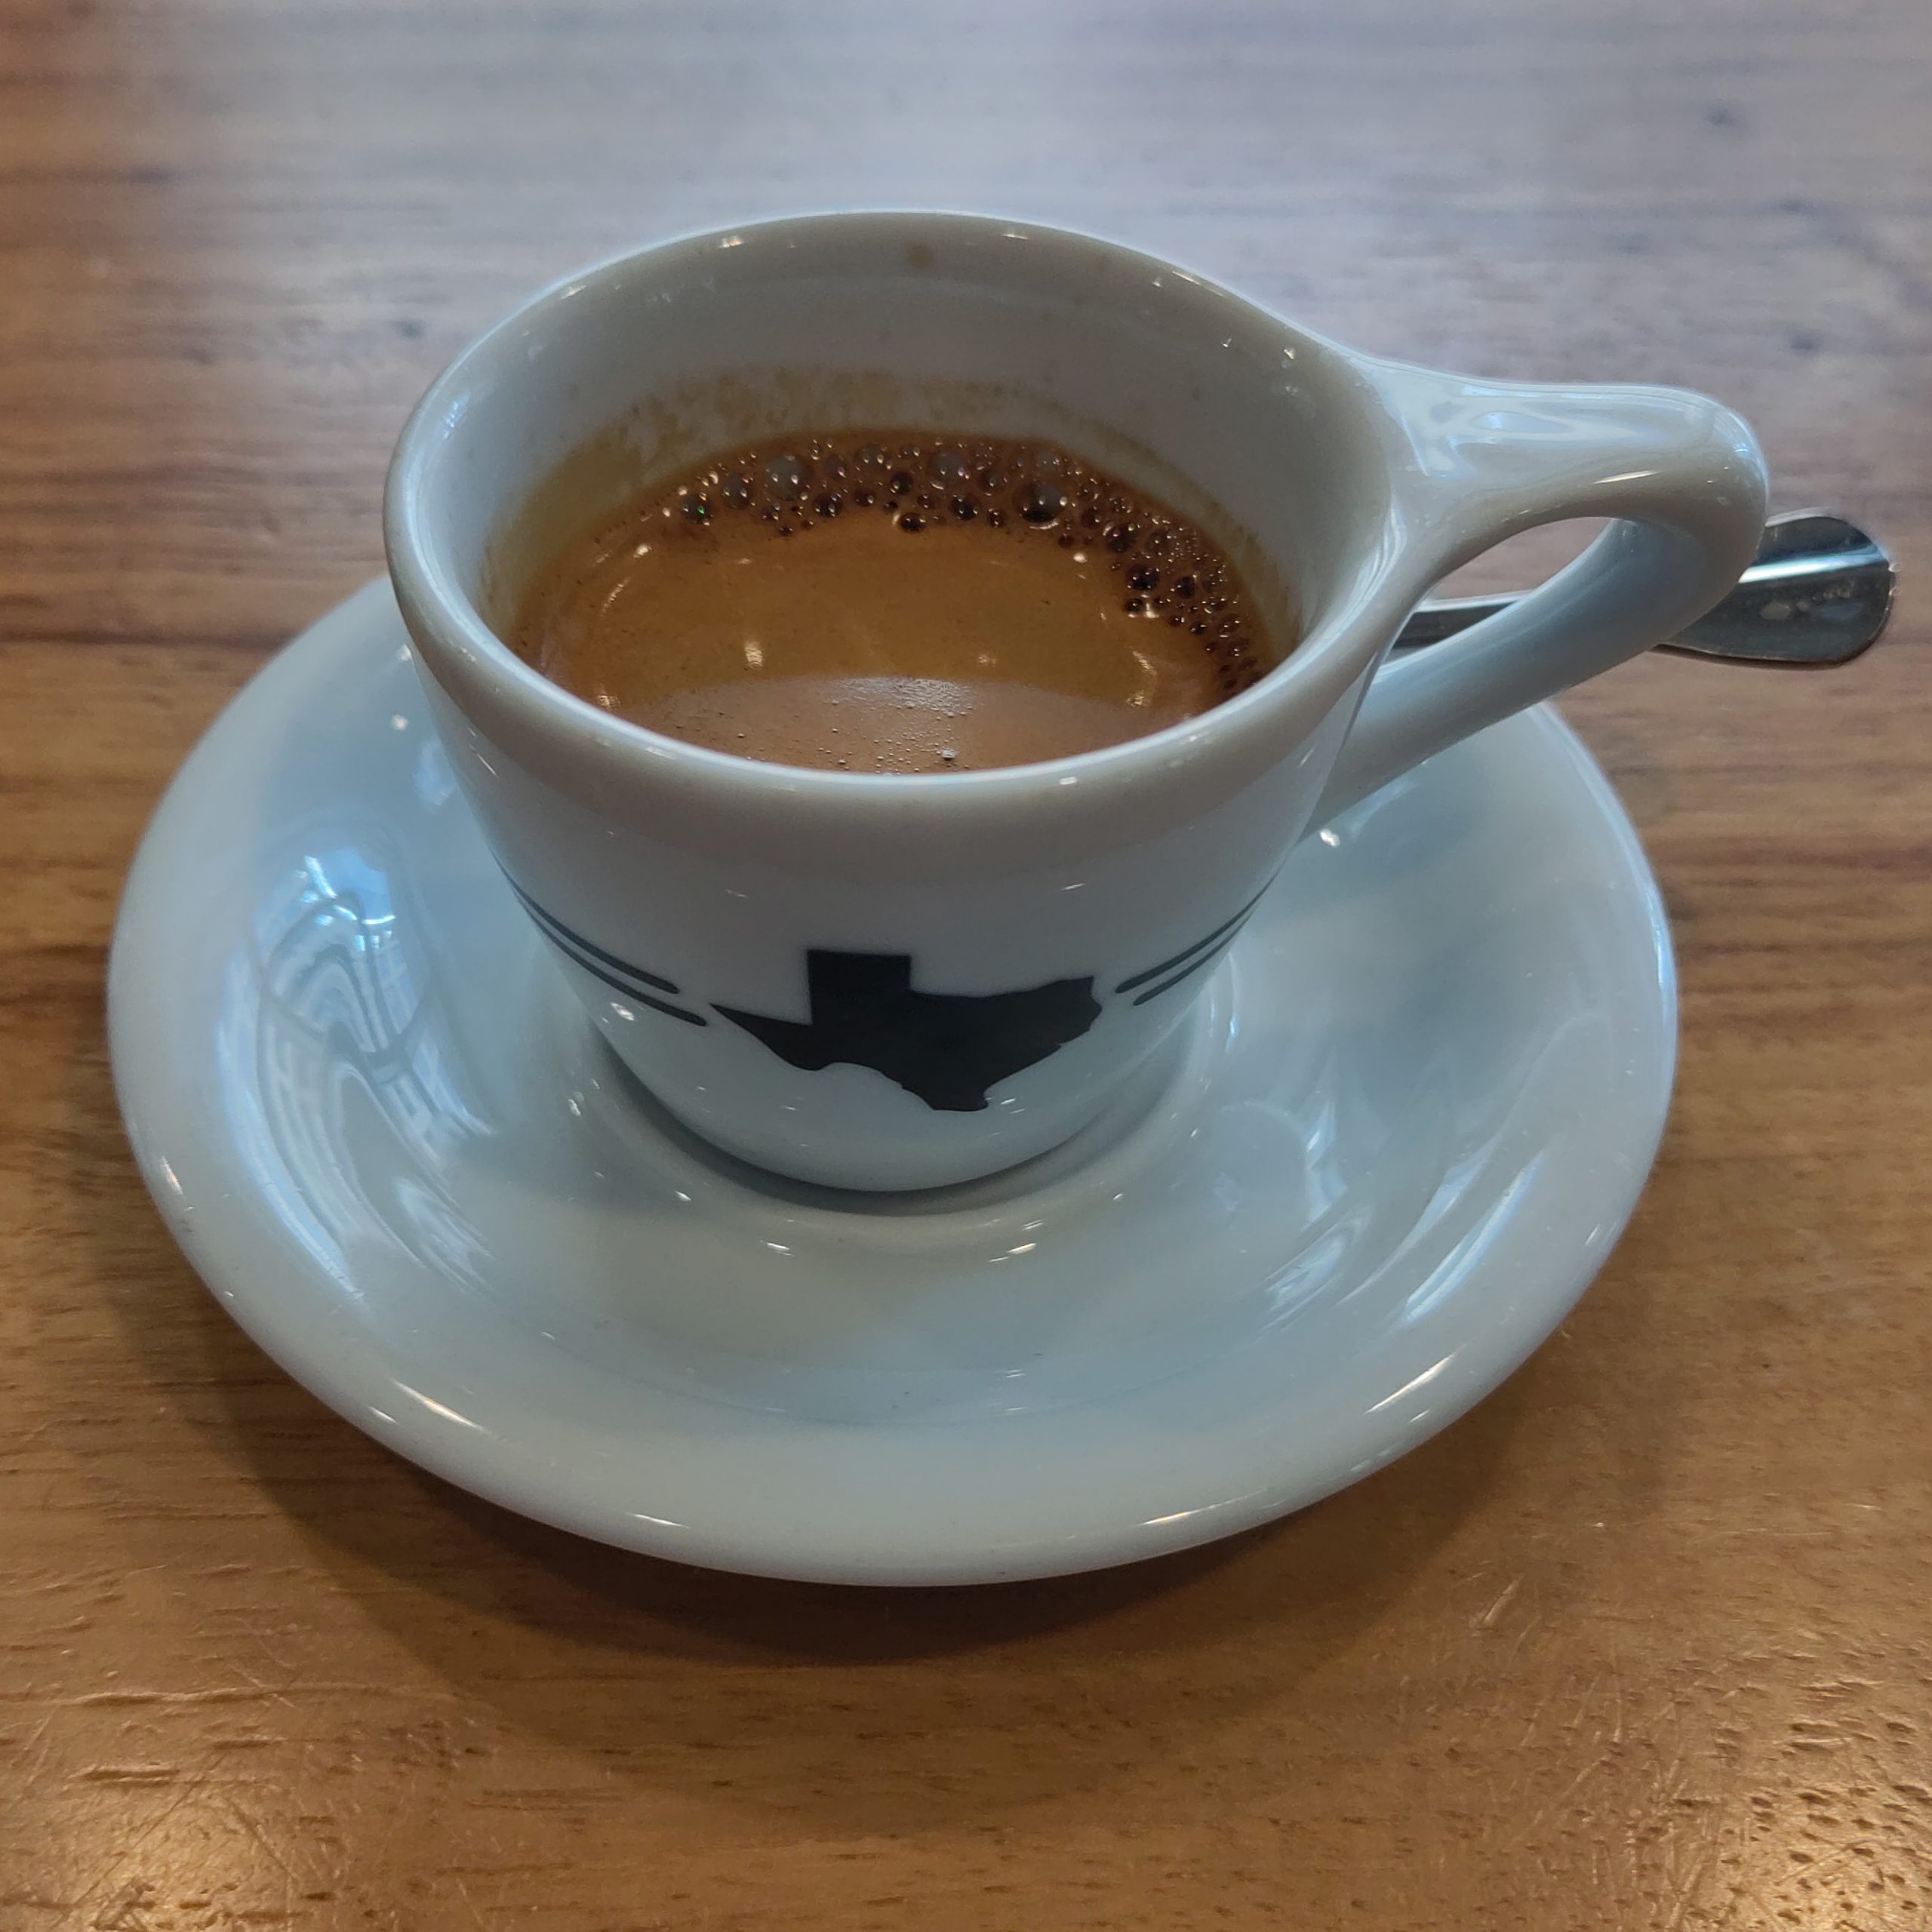 https://www.brian-coffee-spot.com/wp-content/uploads/2022/12/Thumbnail-Houndstooth-Coffee-Downtown-Austin-IMG_20221116_142930t-scaled.jpg